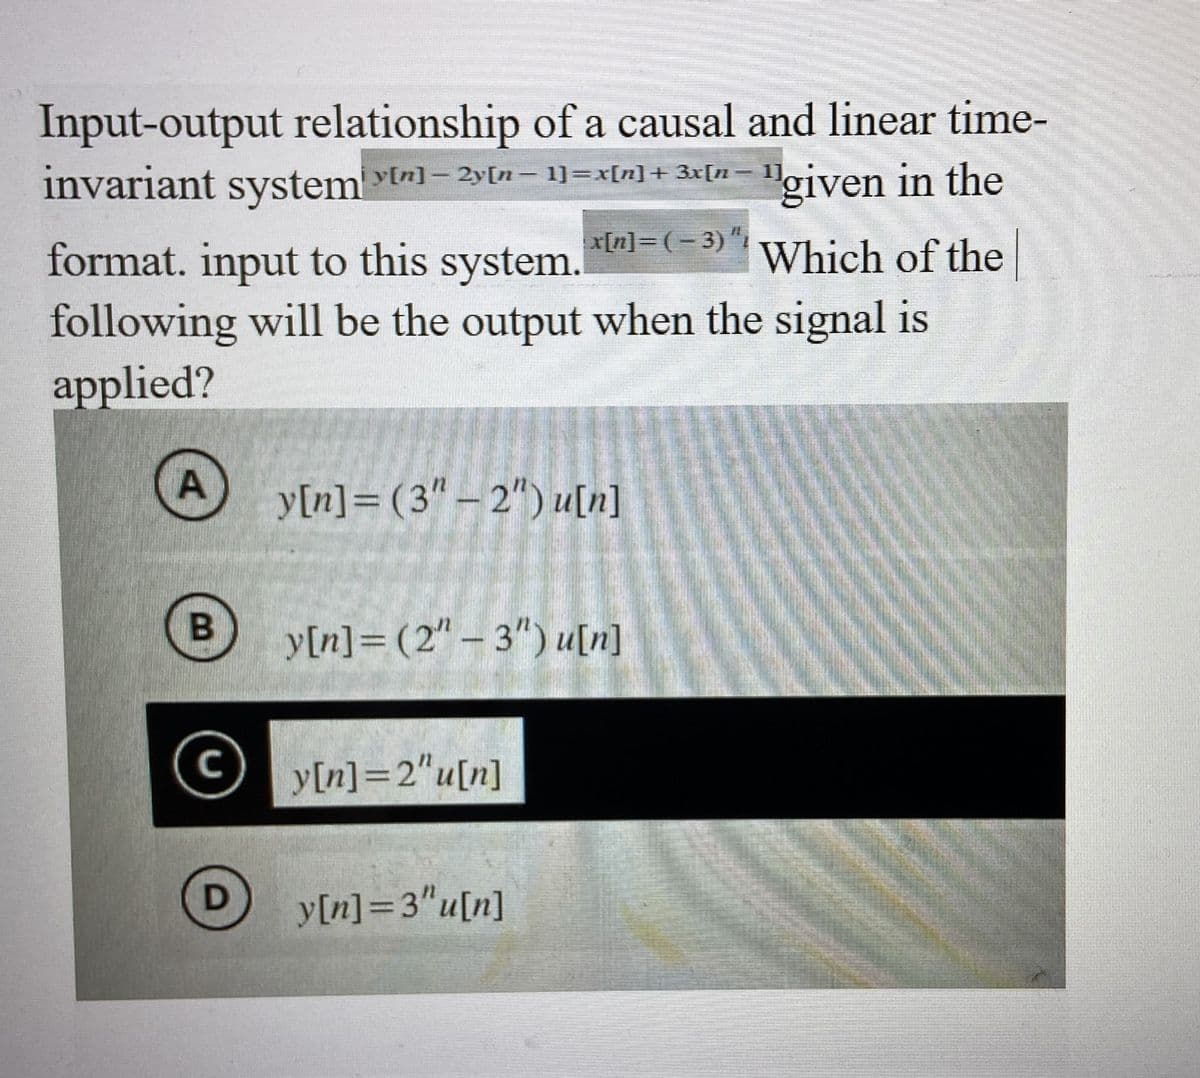 Input-output relationship of a causal and linear time-
y[n] - 2y[n 1]=x[n] + 3x[n − 1]
"given in the
invariant system
A
B
format. input to this system.
Which of the
following will be the output when the signal is
applied?
C
systemy[n] -2yn-
D
-
x[n]=(-3) "i
y[n] = (3"-2") u[n]
y[n] =2"u[n]
y[n] = (2"-3") u[n]
y[n] =3"u[n]